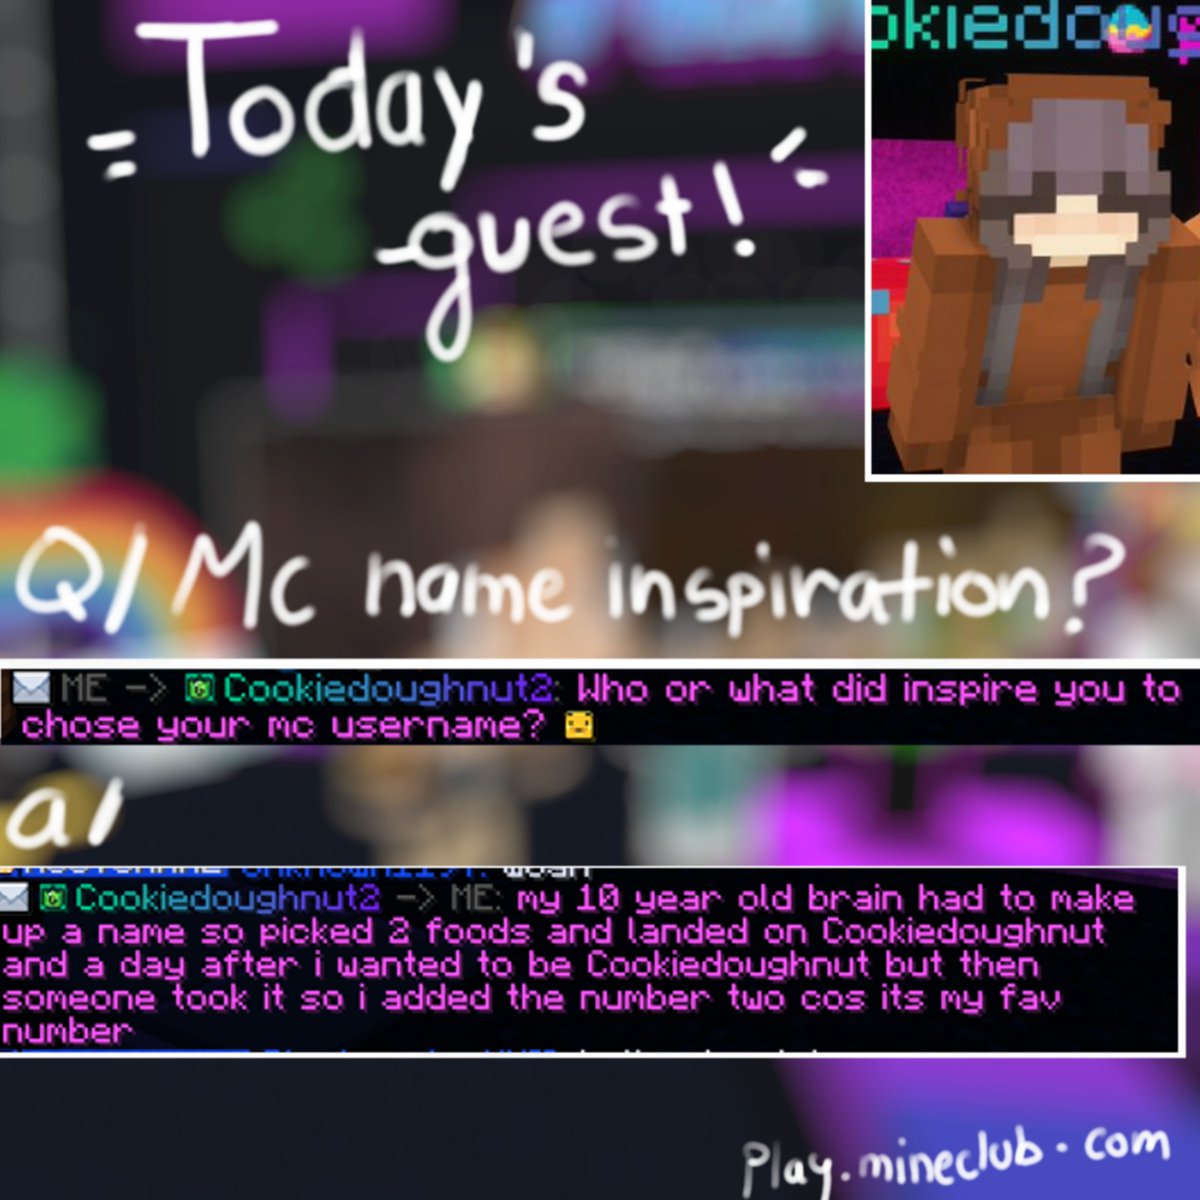 - our new guest today! 
@CookiedoughnutA  thanks for joining us with such a.. story of a username and it always reminds us of... us when we were kids🤡but somehow you didn't change that name for 5 years and it's pretty impressive and cute :}
#minecraft #mineclub #socialexperience